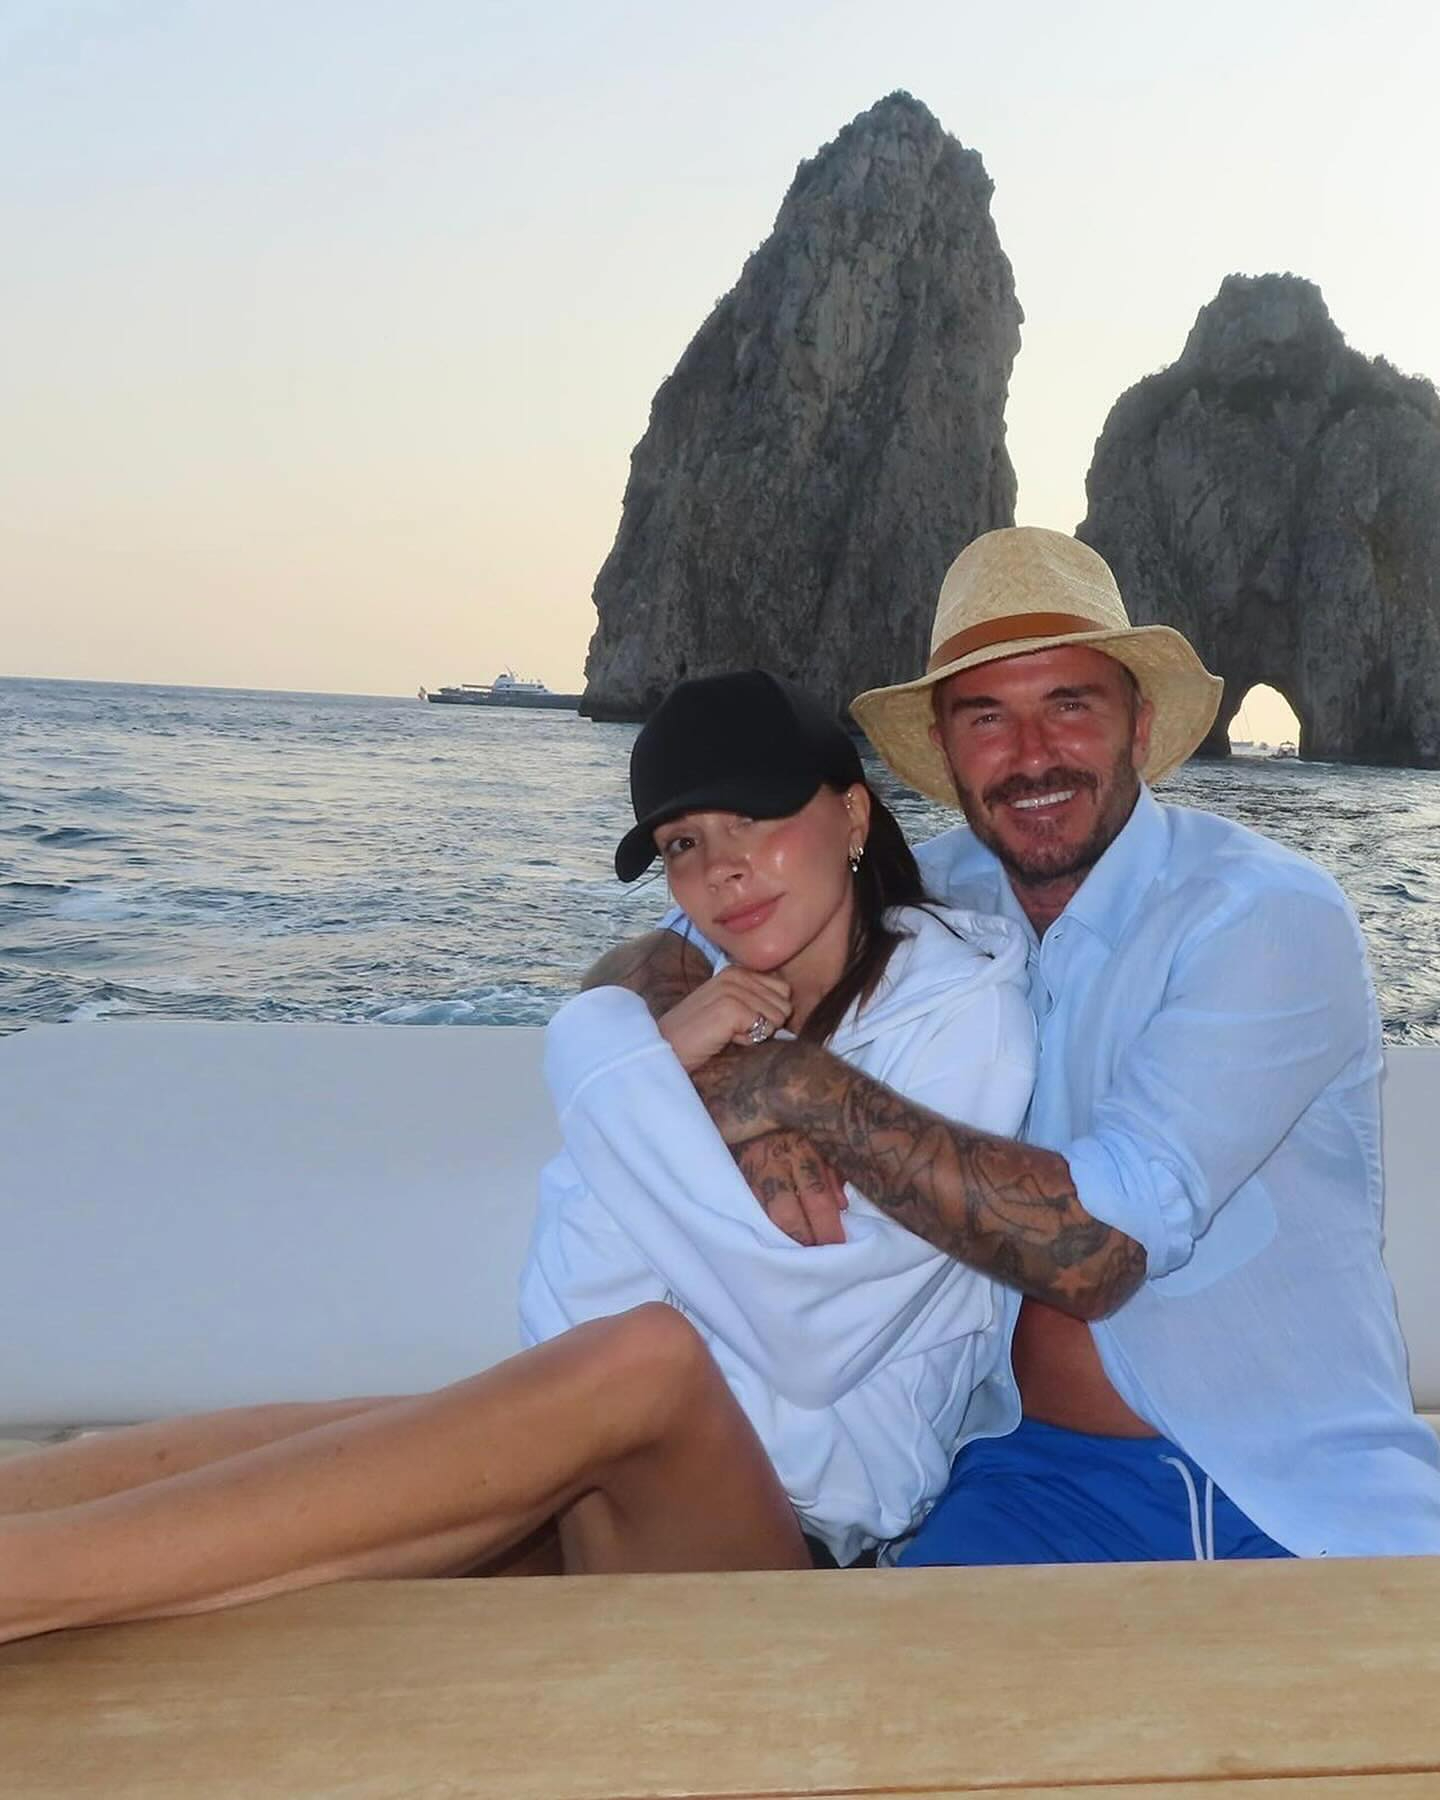 David Beckham and Victoria have been cruising Italy’s hotspots